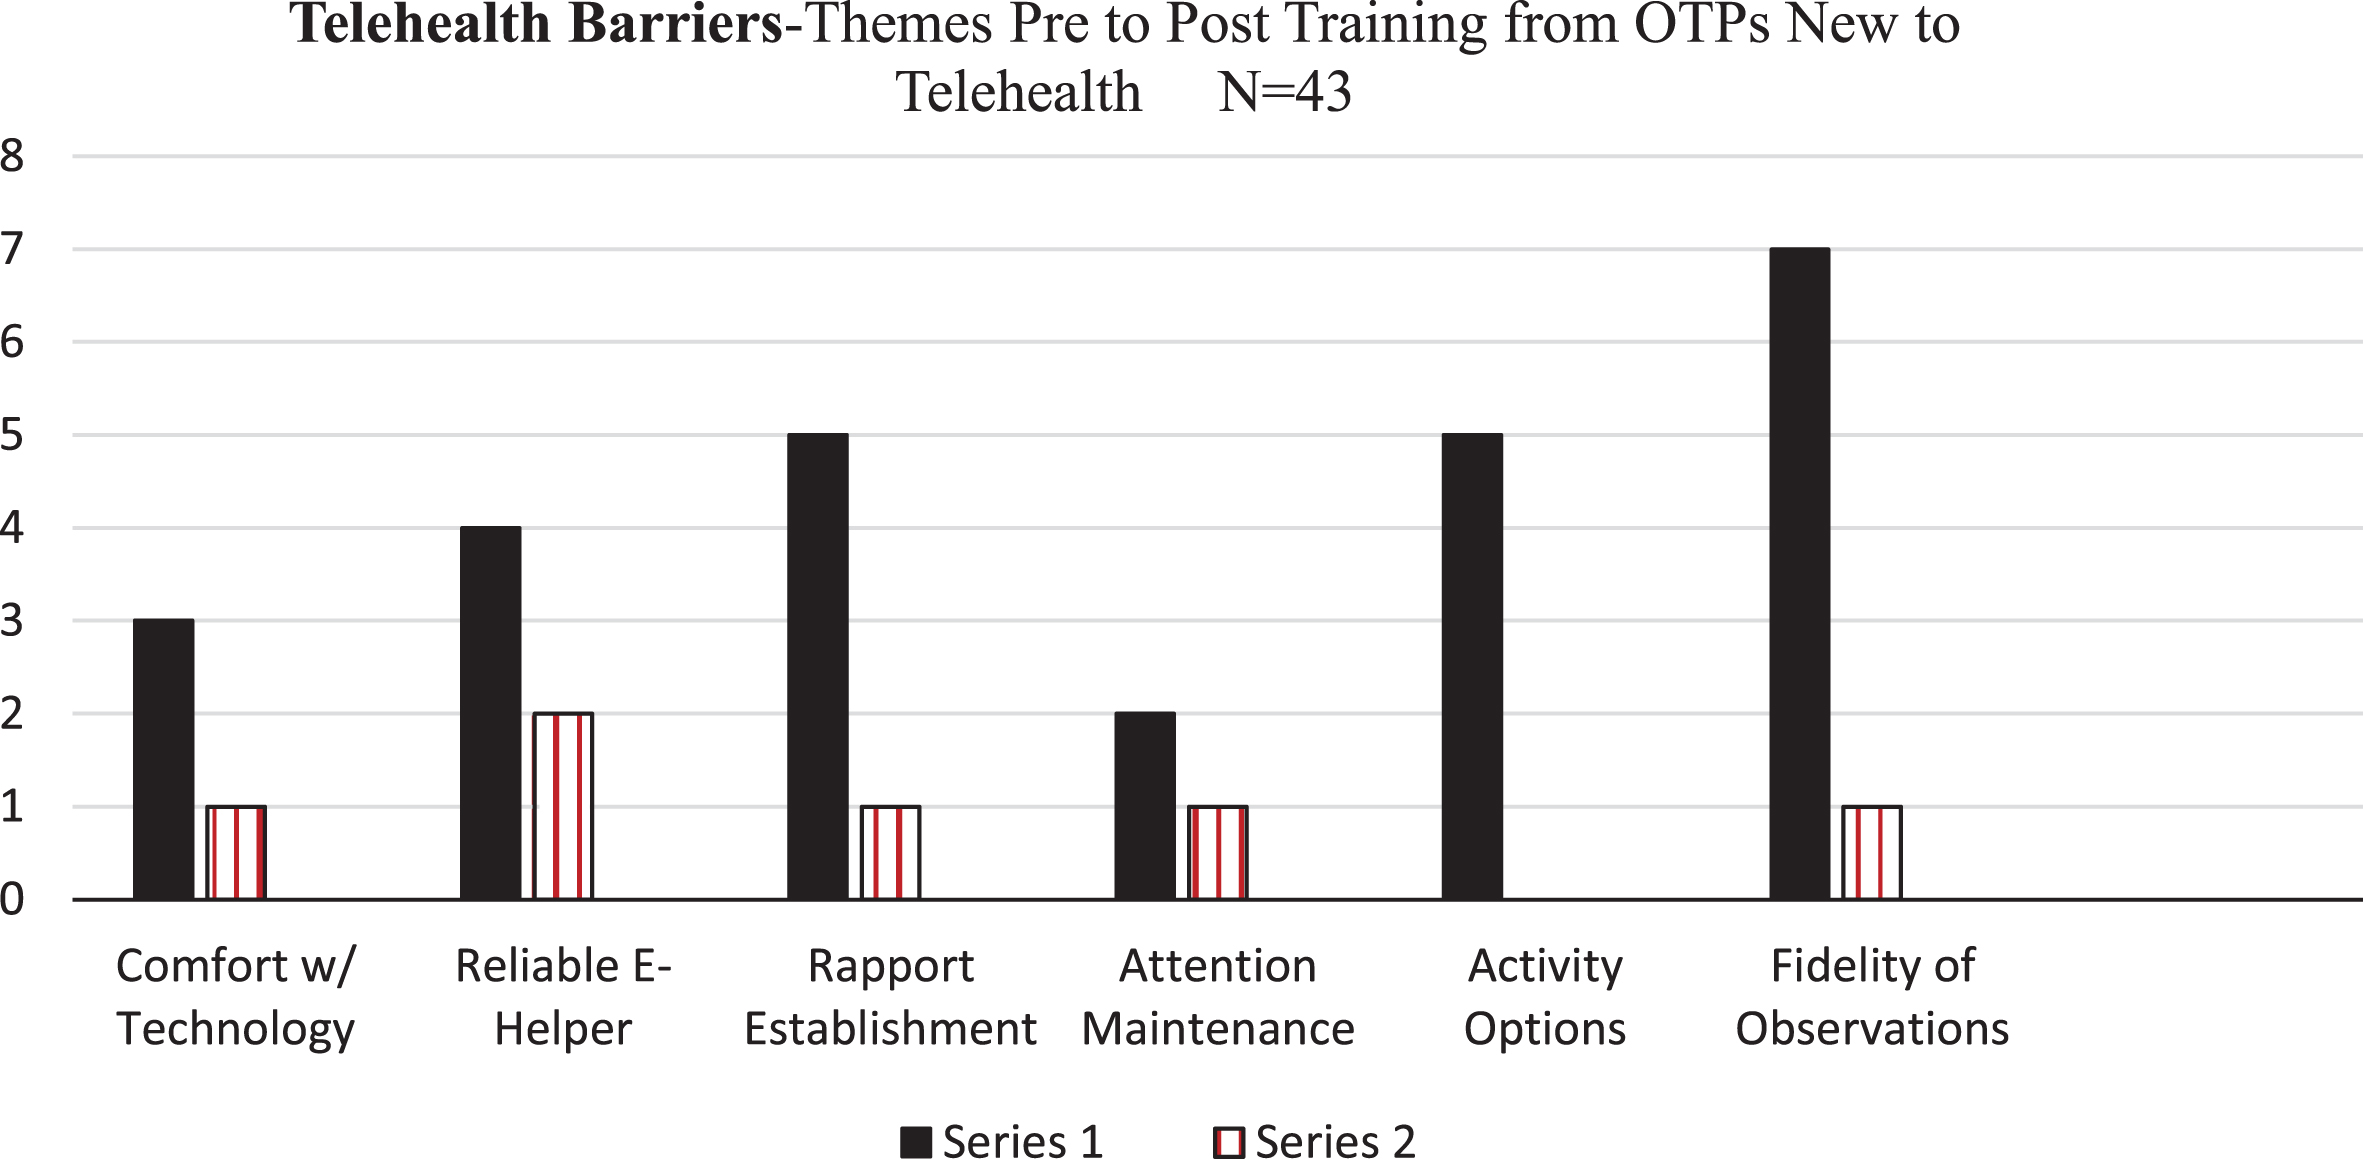 Reported Perceived Barriers with Telehealth per OTPs New to TelehealthPre and Post Training Completion: Perceived Barriers That Decreased Post Training.